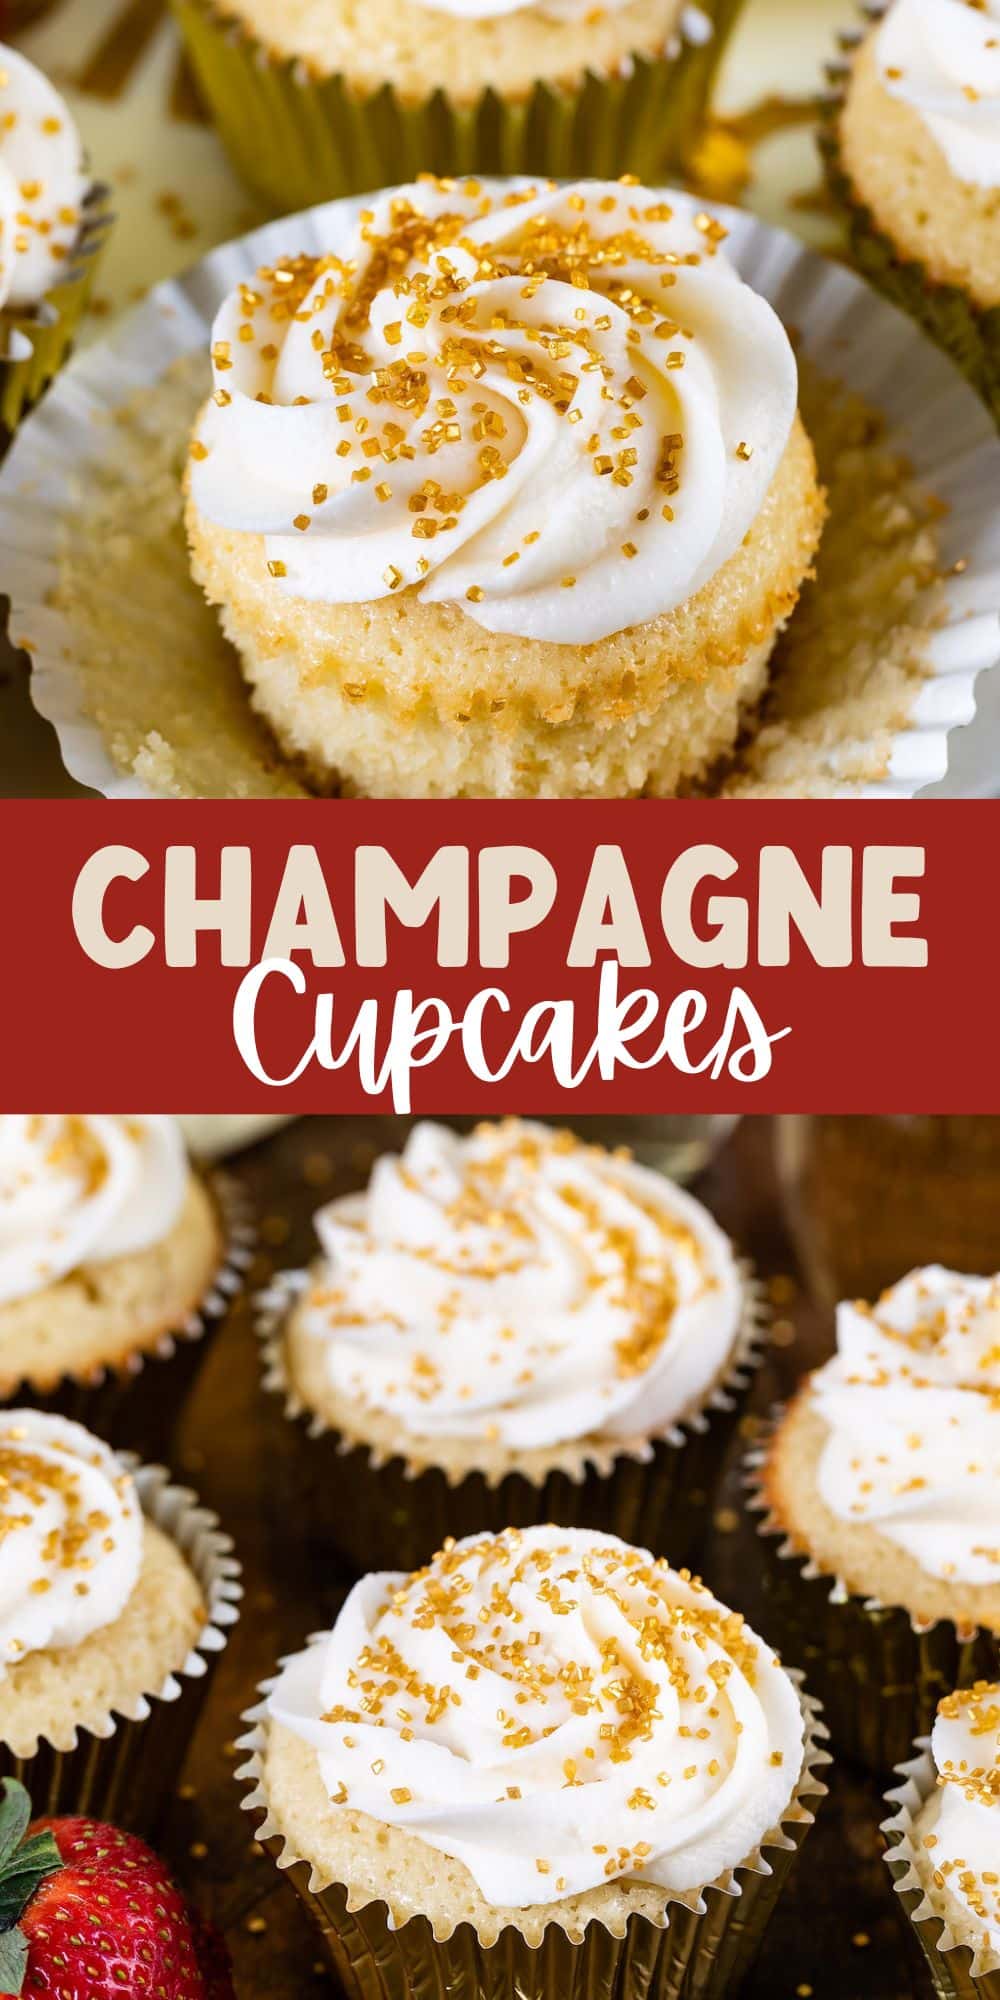 two photos of the champagne cupcakes with white frosting and gold sprinkles on top and words in the middle of the images